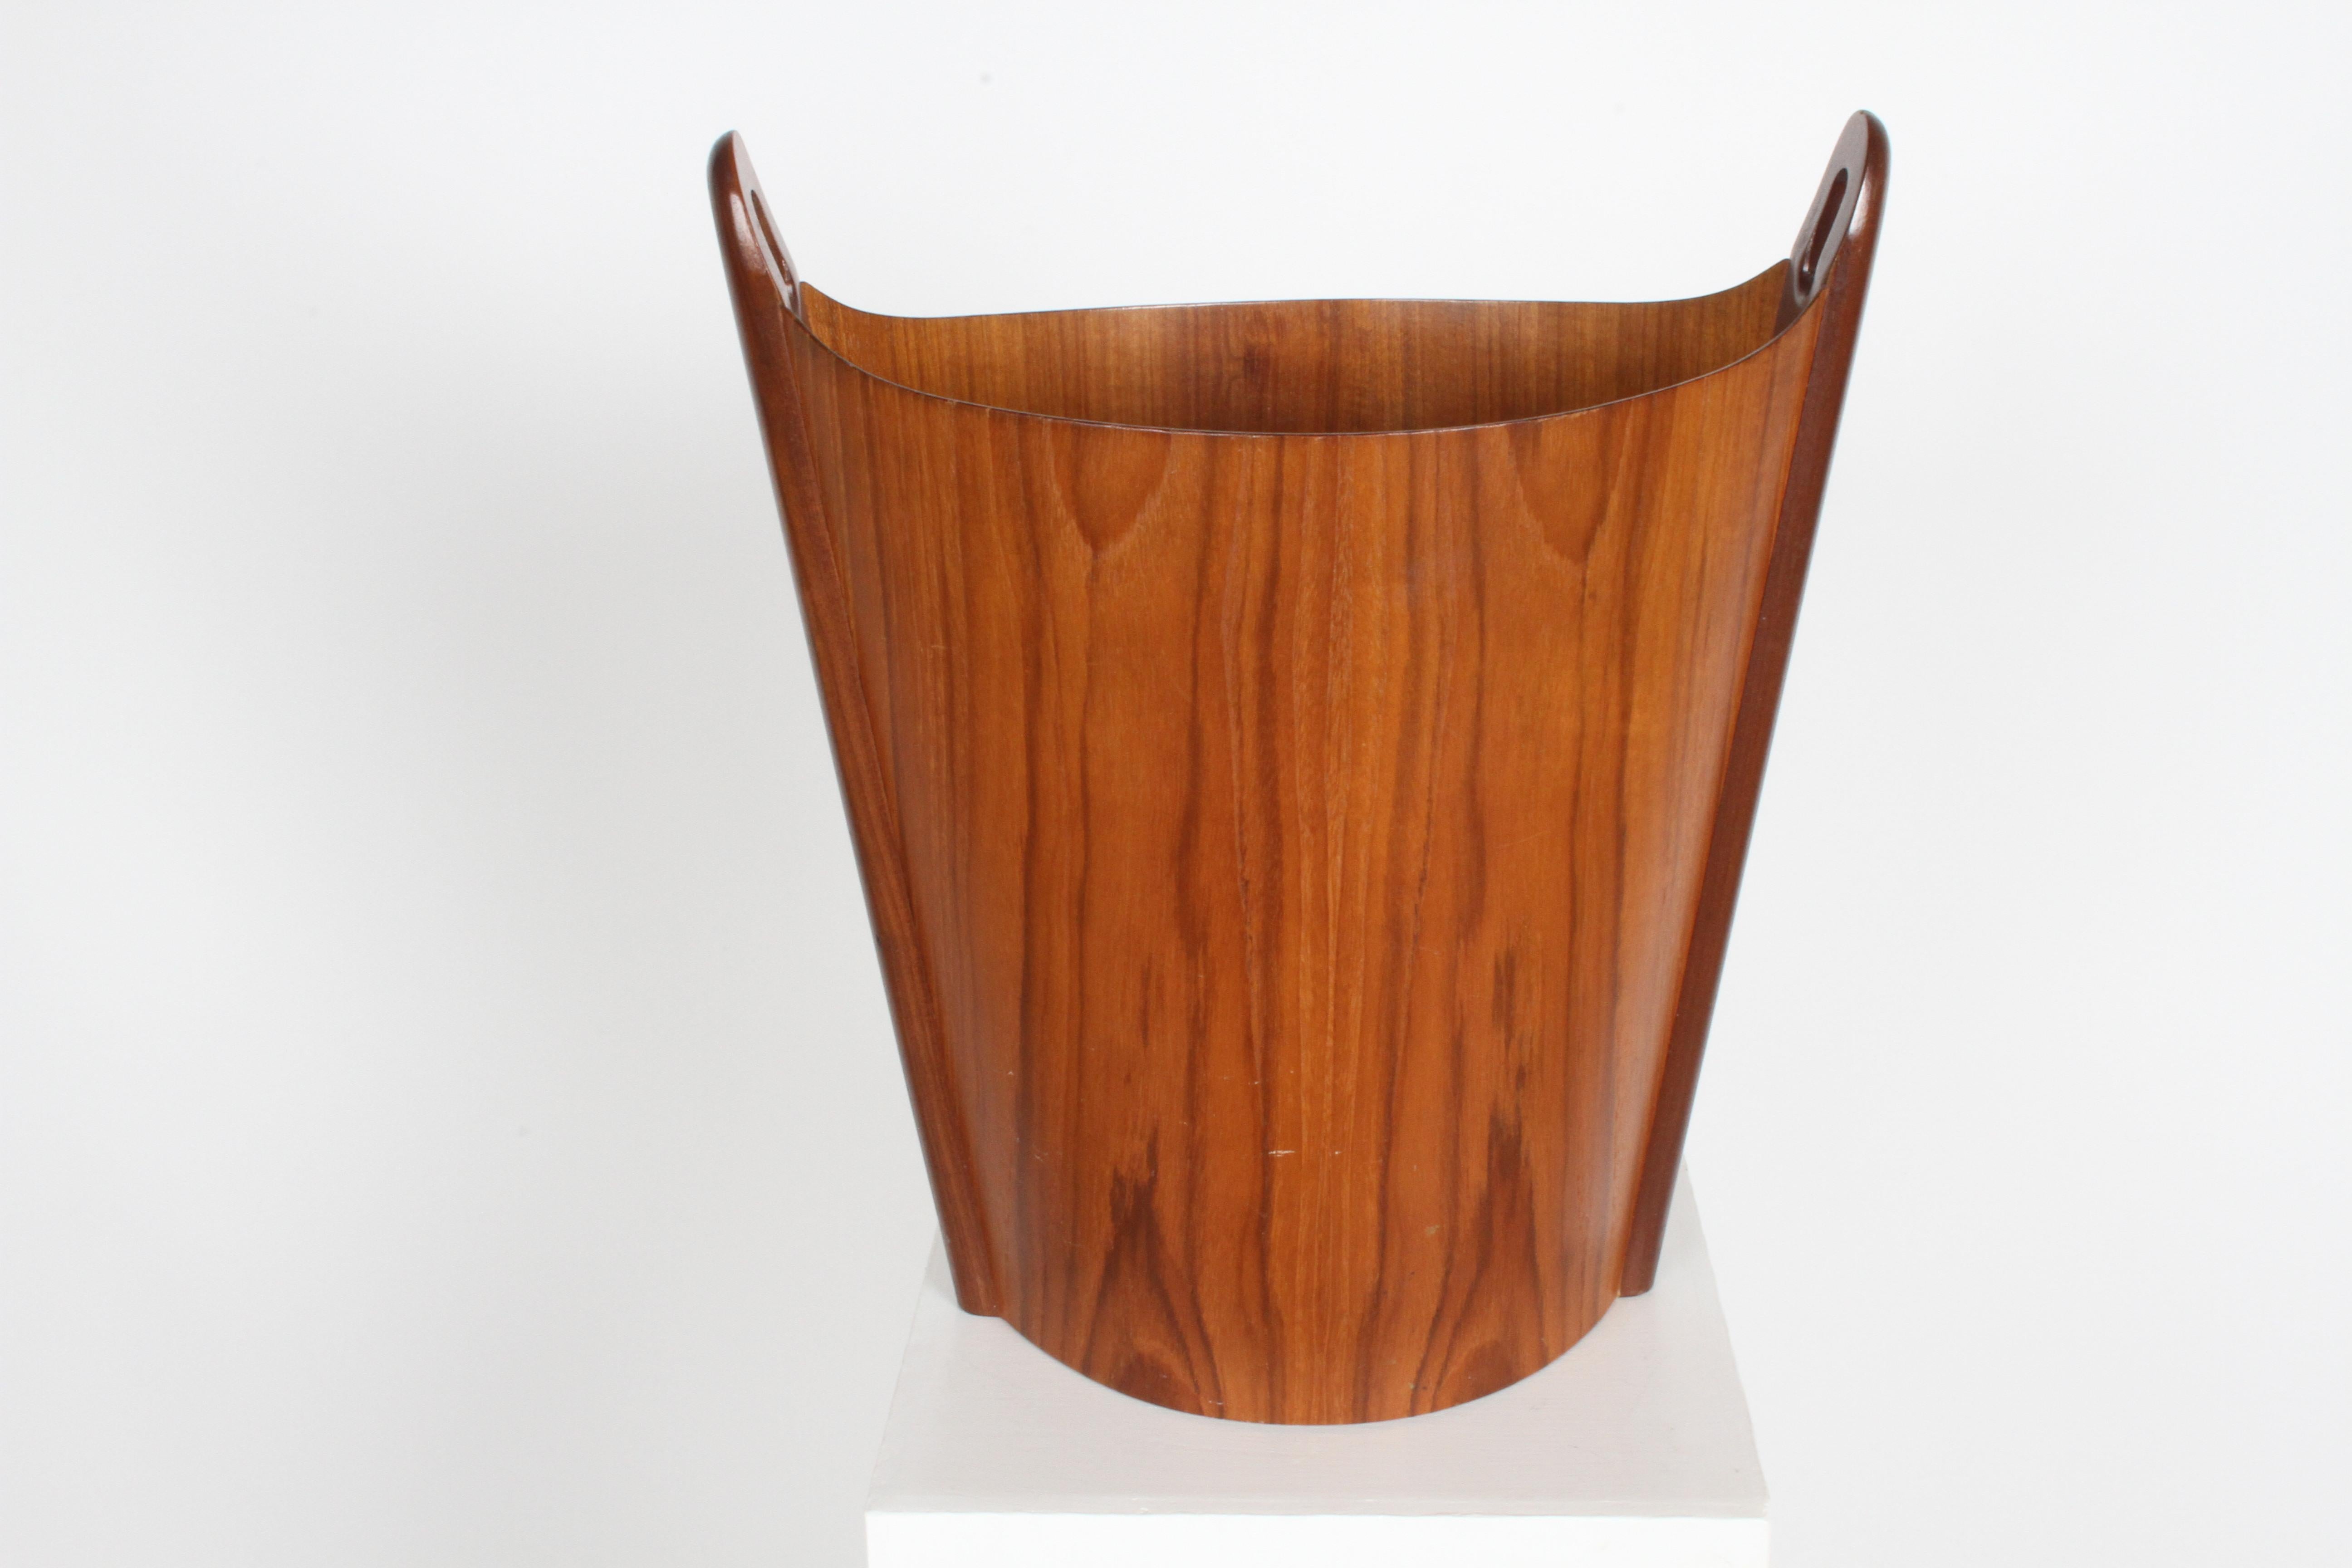 Einar Barnes for P.S. Heggen Danish modern waste bin, wastebasket or trash can in two-tone combination of Teak and Rosewood. A wastebasket with delicate construction that is lightweight, oblong in shape with a solid rosewood ridge at either end the